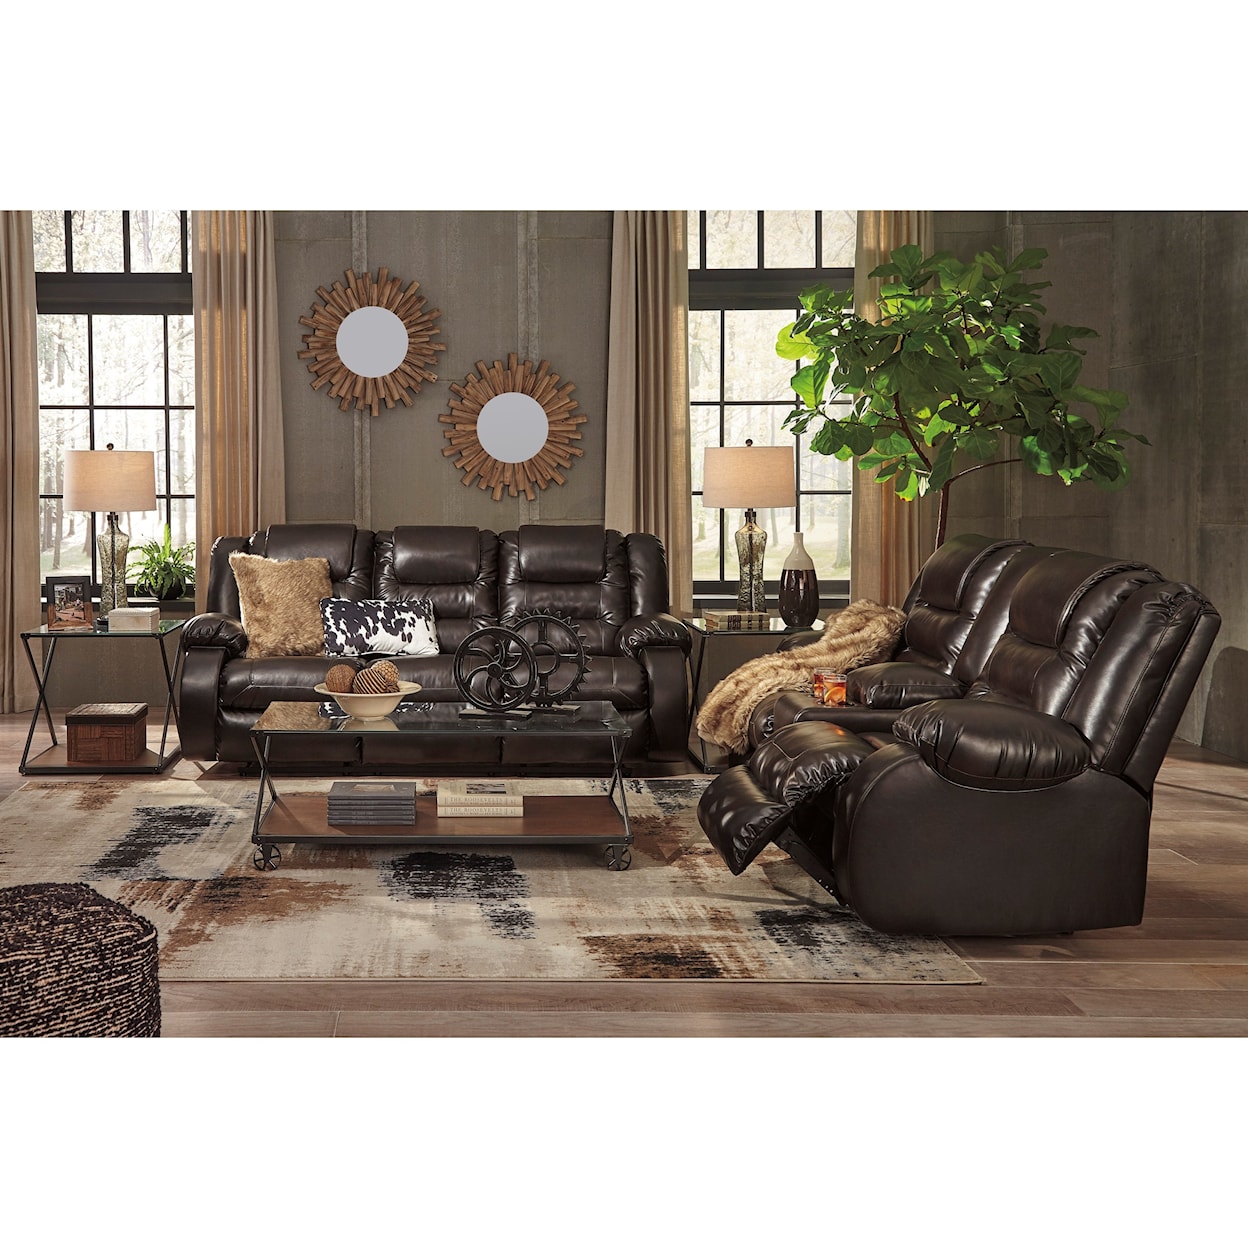 Signature Design by Ashley Furniture Vacherie Reclining Living Room Group